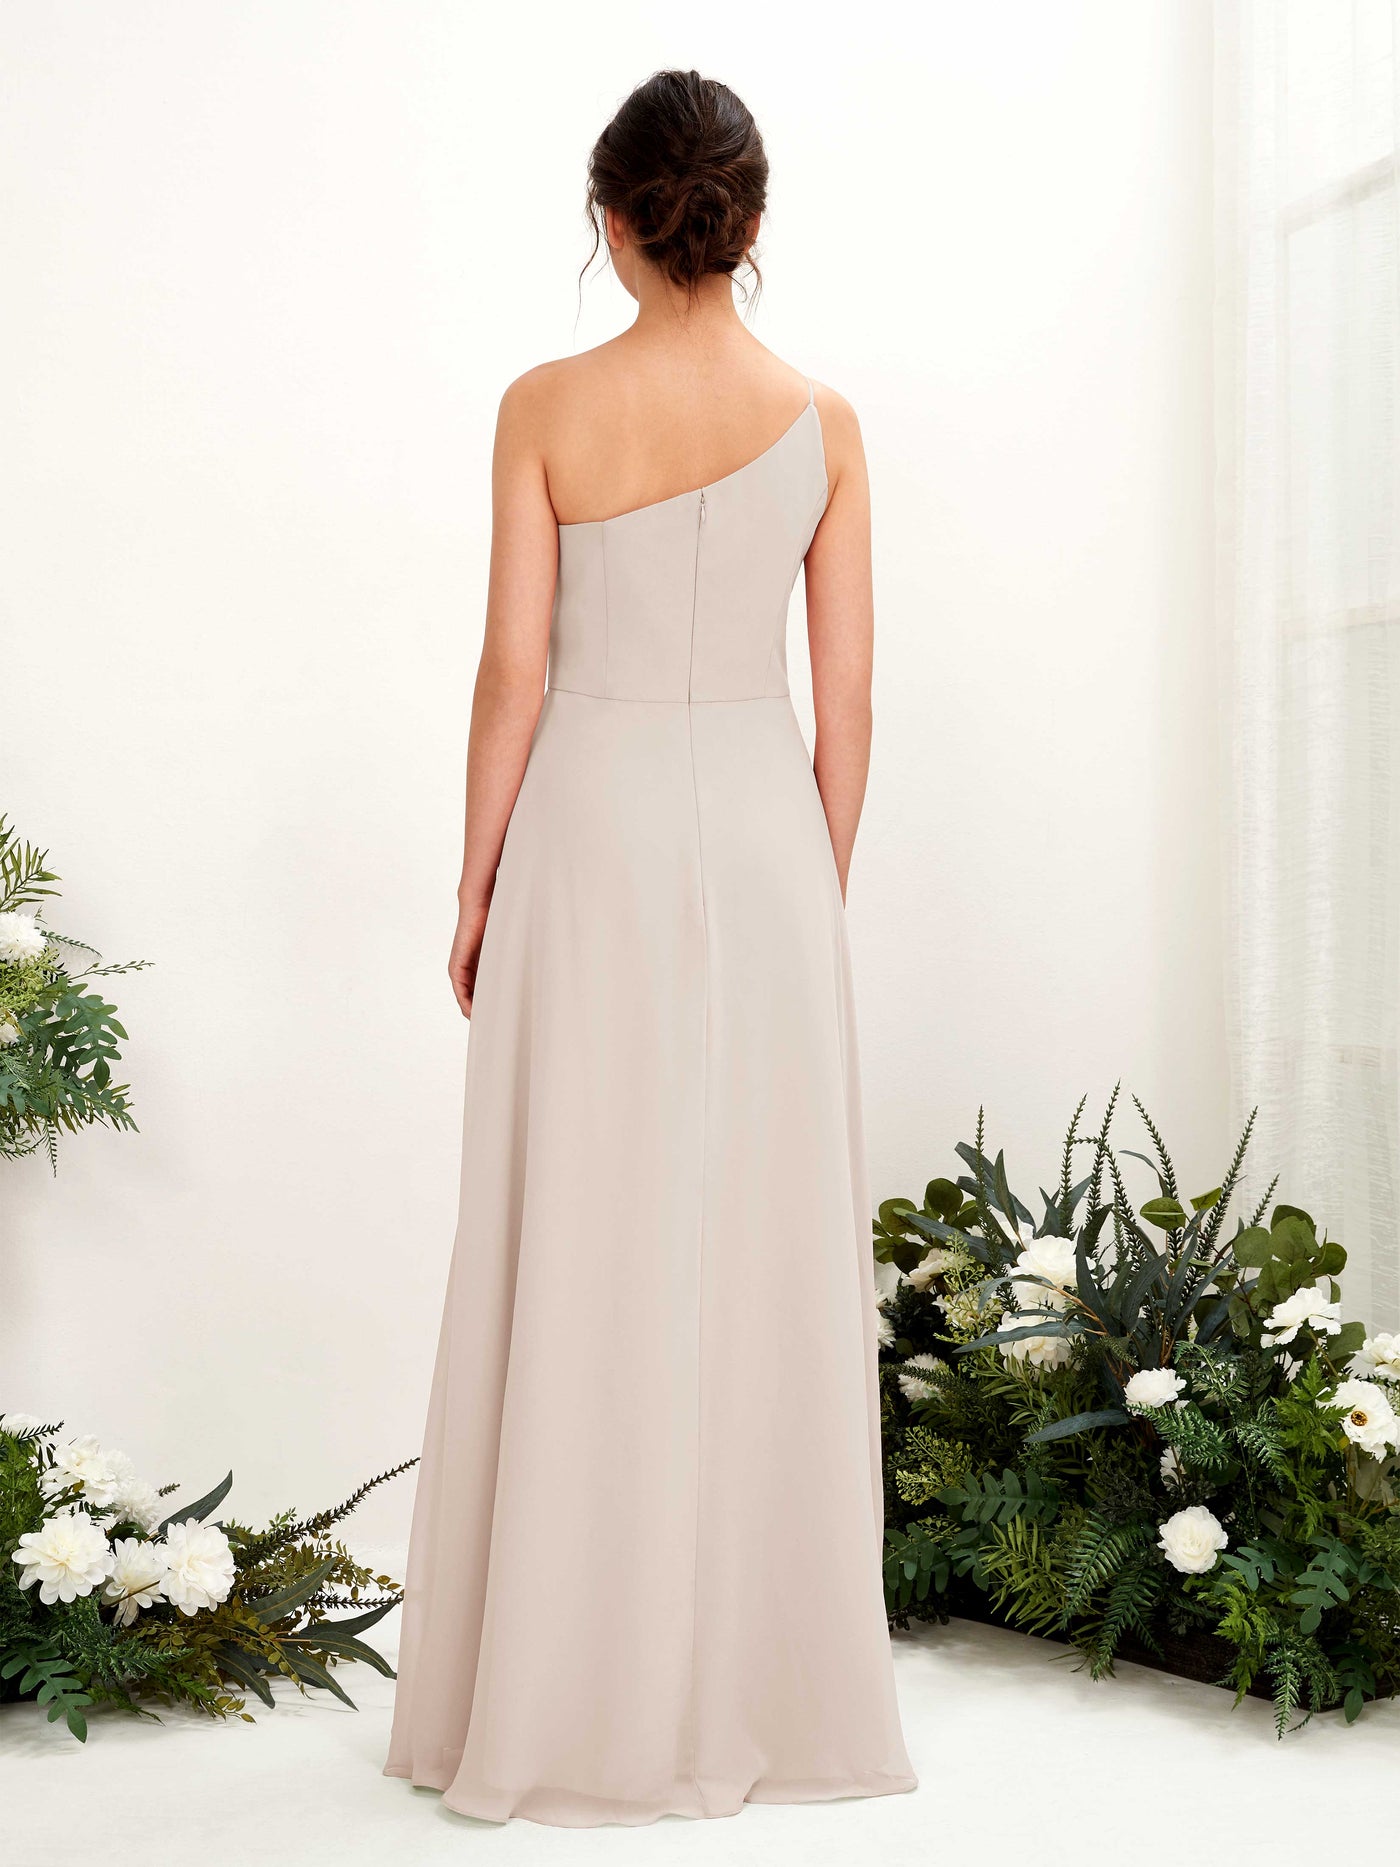 Champagne Bridesmaid Dresses Bridesmaid Dress A-line Chiffon One Shoulder Full Length Sleeveless Wedding Party Dress (81225716)#color_champagne